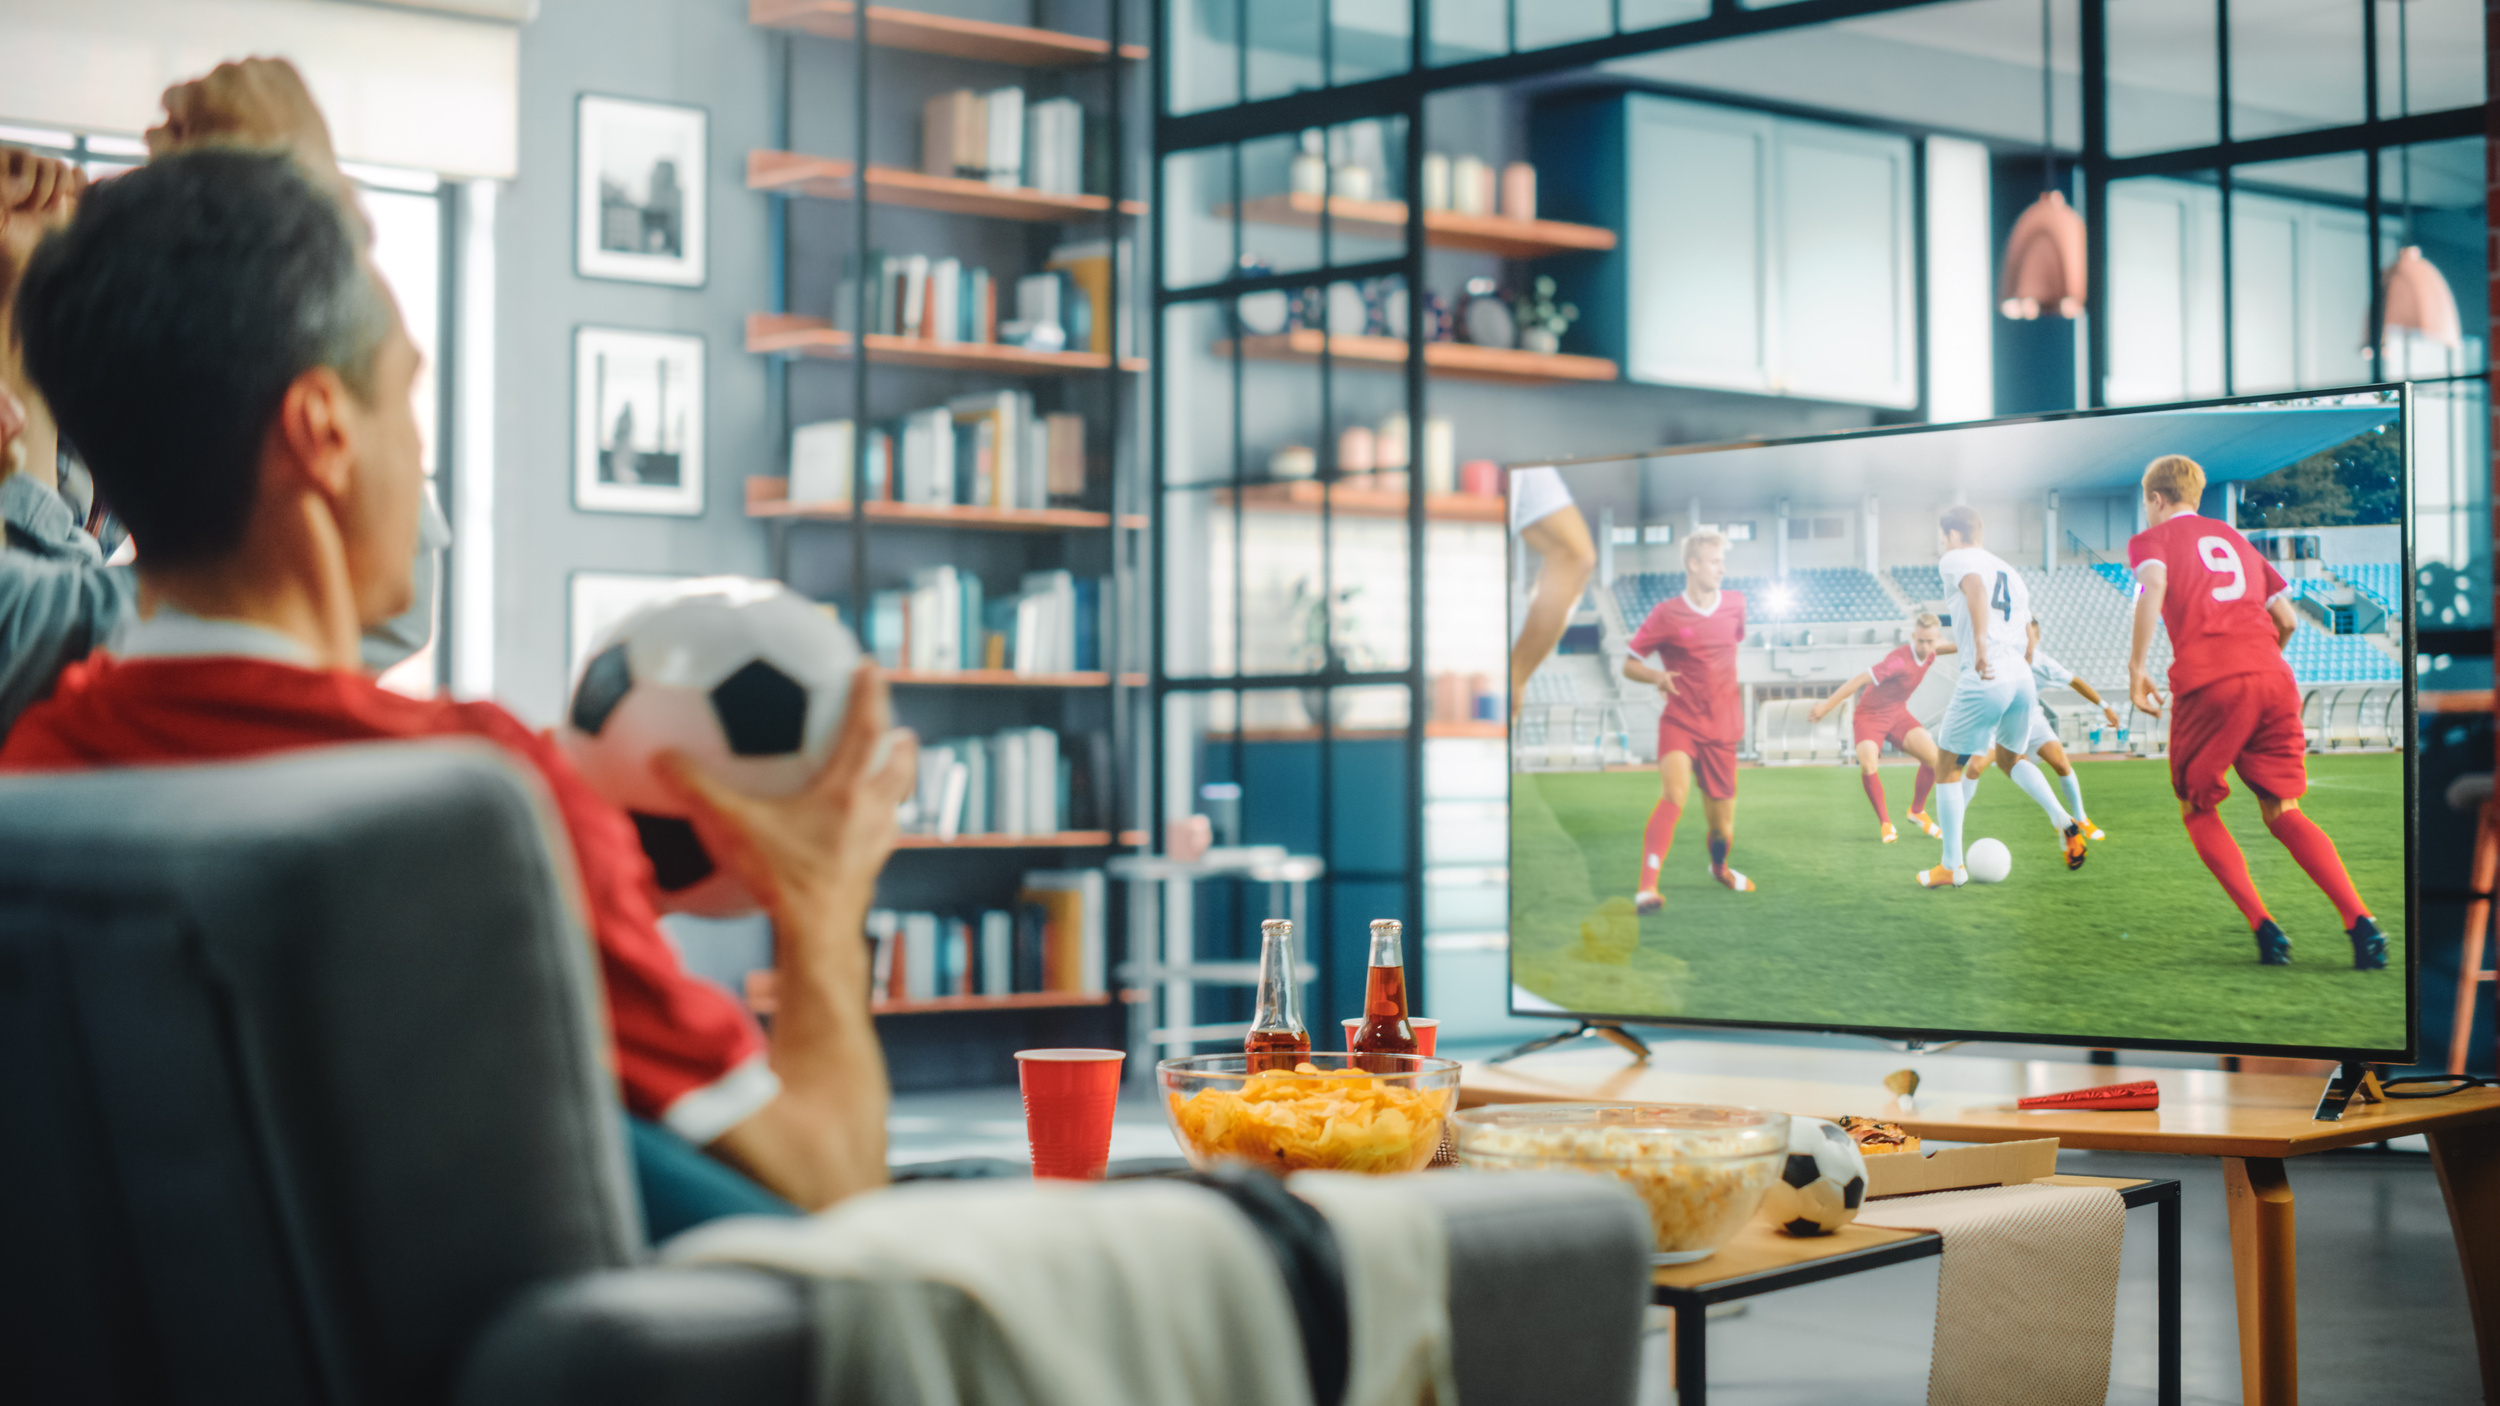 <p>In case you missed the last World Cup, every other country calls “soccer” “football.” If you want to talk about American “football," say “American football,” and they’ll know what you mean.</p><p><a href='https://www.msn.com/en-us/community/channel/vid-cj9pqbr0vn9in2b6ddcd8sfgpfq6x6utp44fssrv6mc2gtybw0us'>Did you enjoy this slideshow? Follow us on MSN to see more of our exclusive lifestyle content.</a></p>